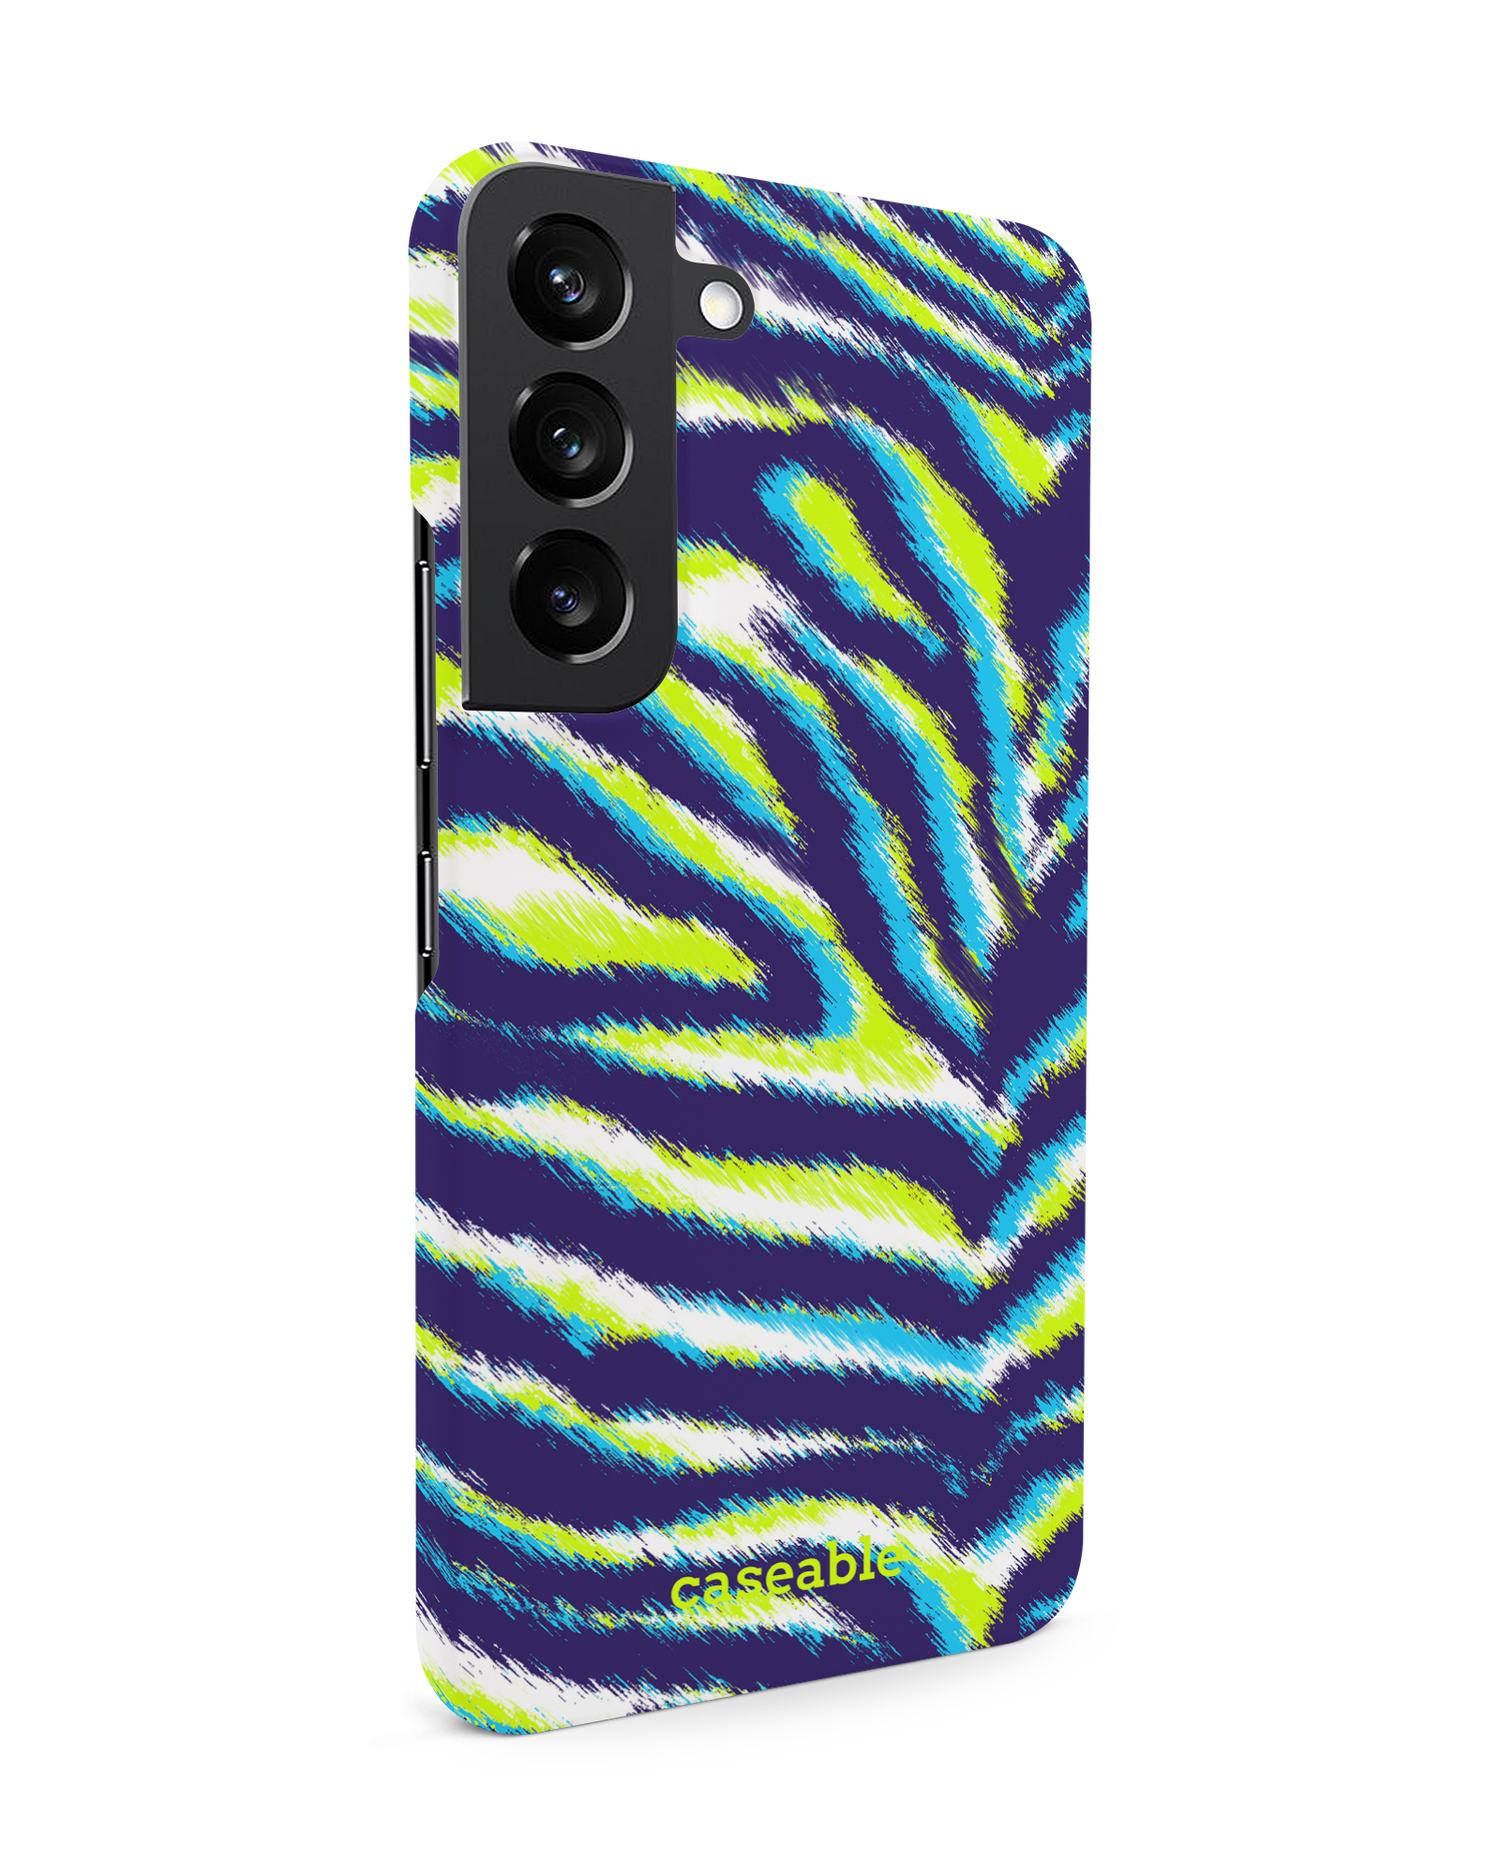 Neon Zebra Hard Shell Phone Case Samsung Galaxy S22 5G: View from the left side